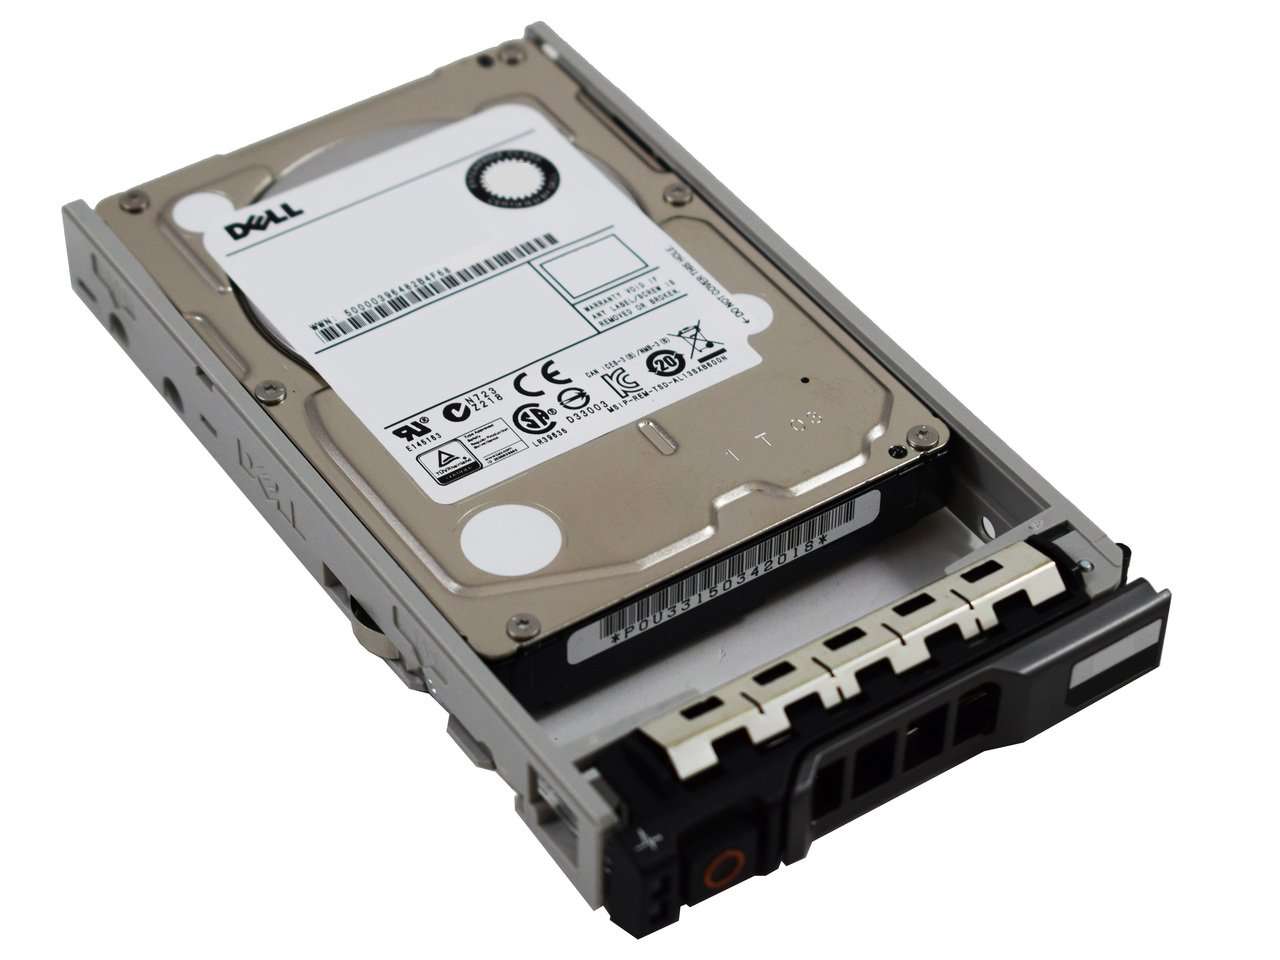 Dell G13 342-3149 600GB 10K RPM SAS 6Gb/s 512n 2.5" Manufacturer Recertified HDD